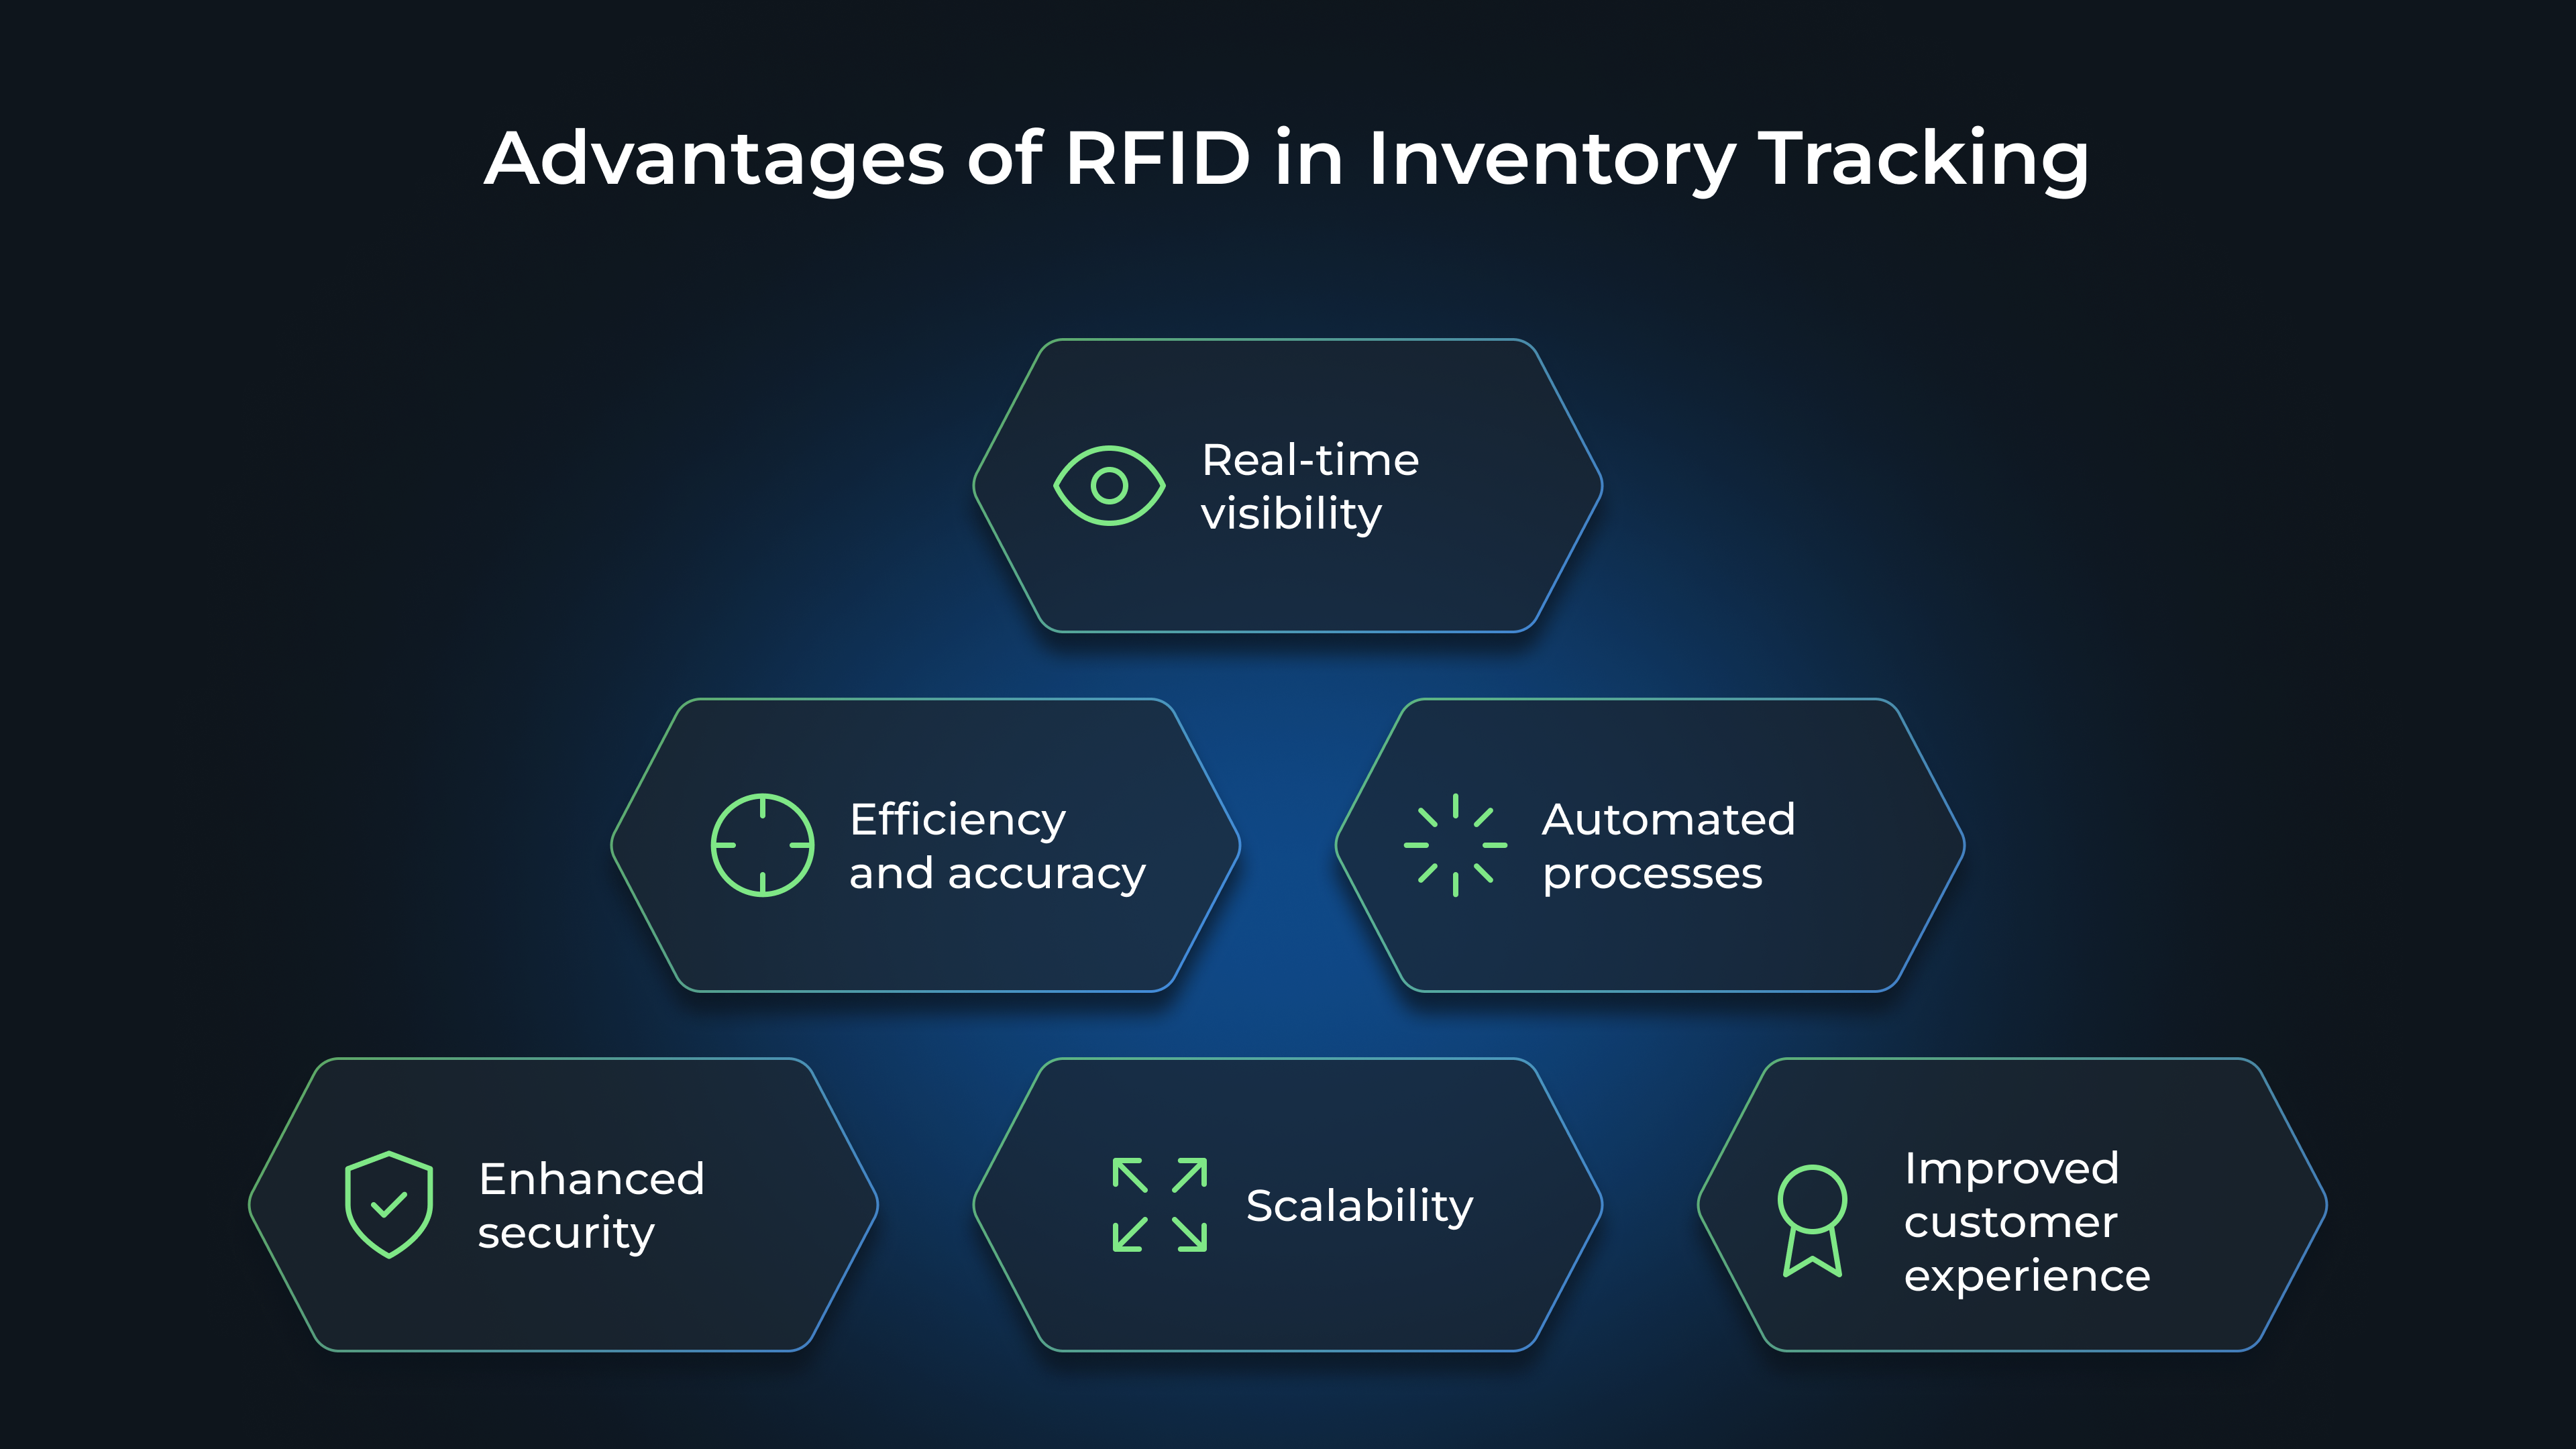 Advantages of RFID in Inventory Tracking: Real-time visibility, Efficiency and accuracy, Automated processes, Enhanced security, Scalability, Improved customer experience 